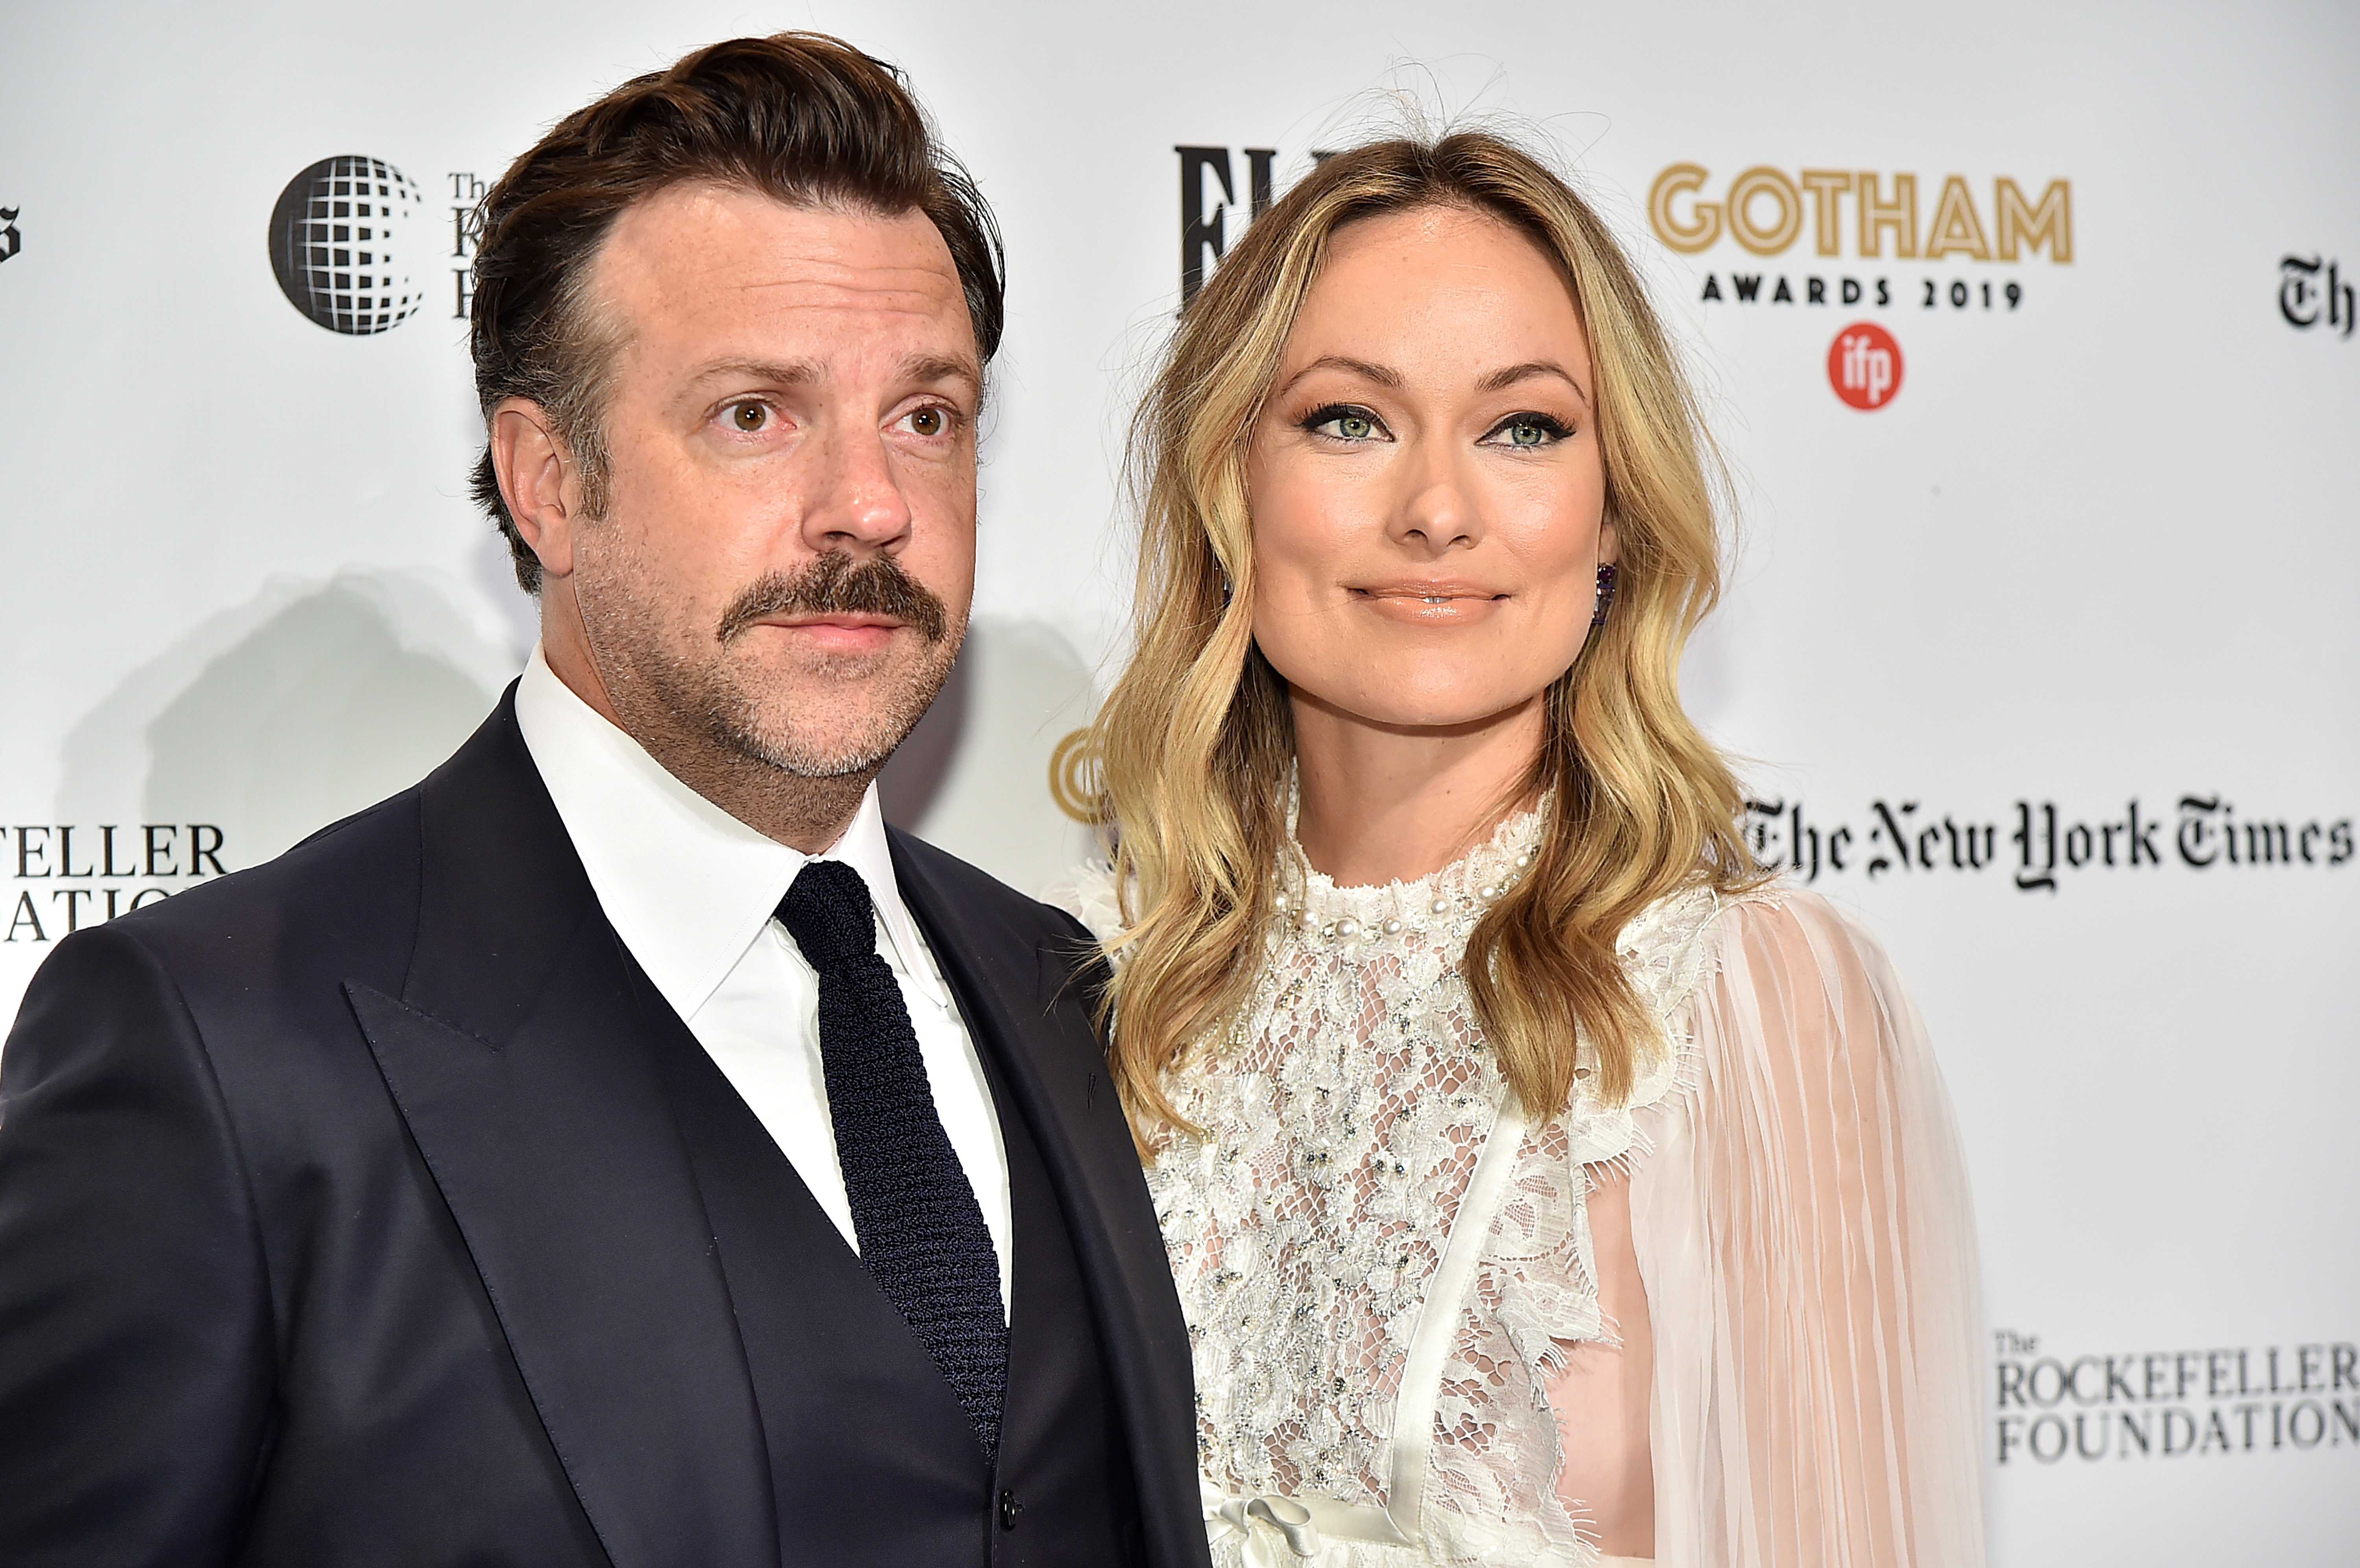 Jason Sudeikis and Olivia Wilde at the IFP's 29th Annual Gotham Independent Film Awards in New York on December 2, 2019 | Source: Getty Images